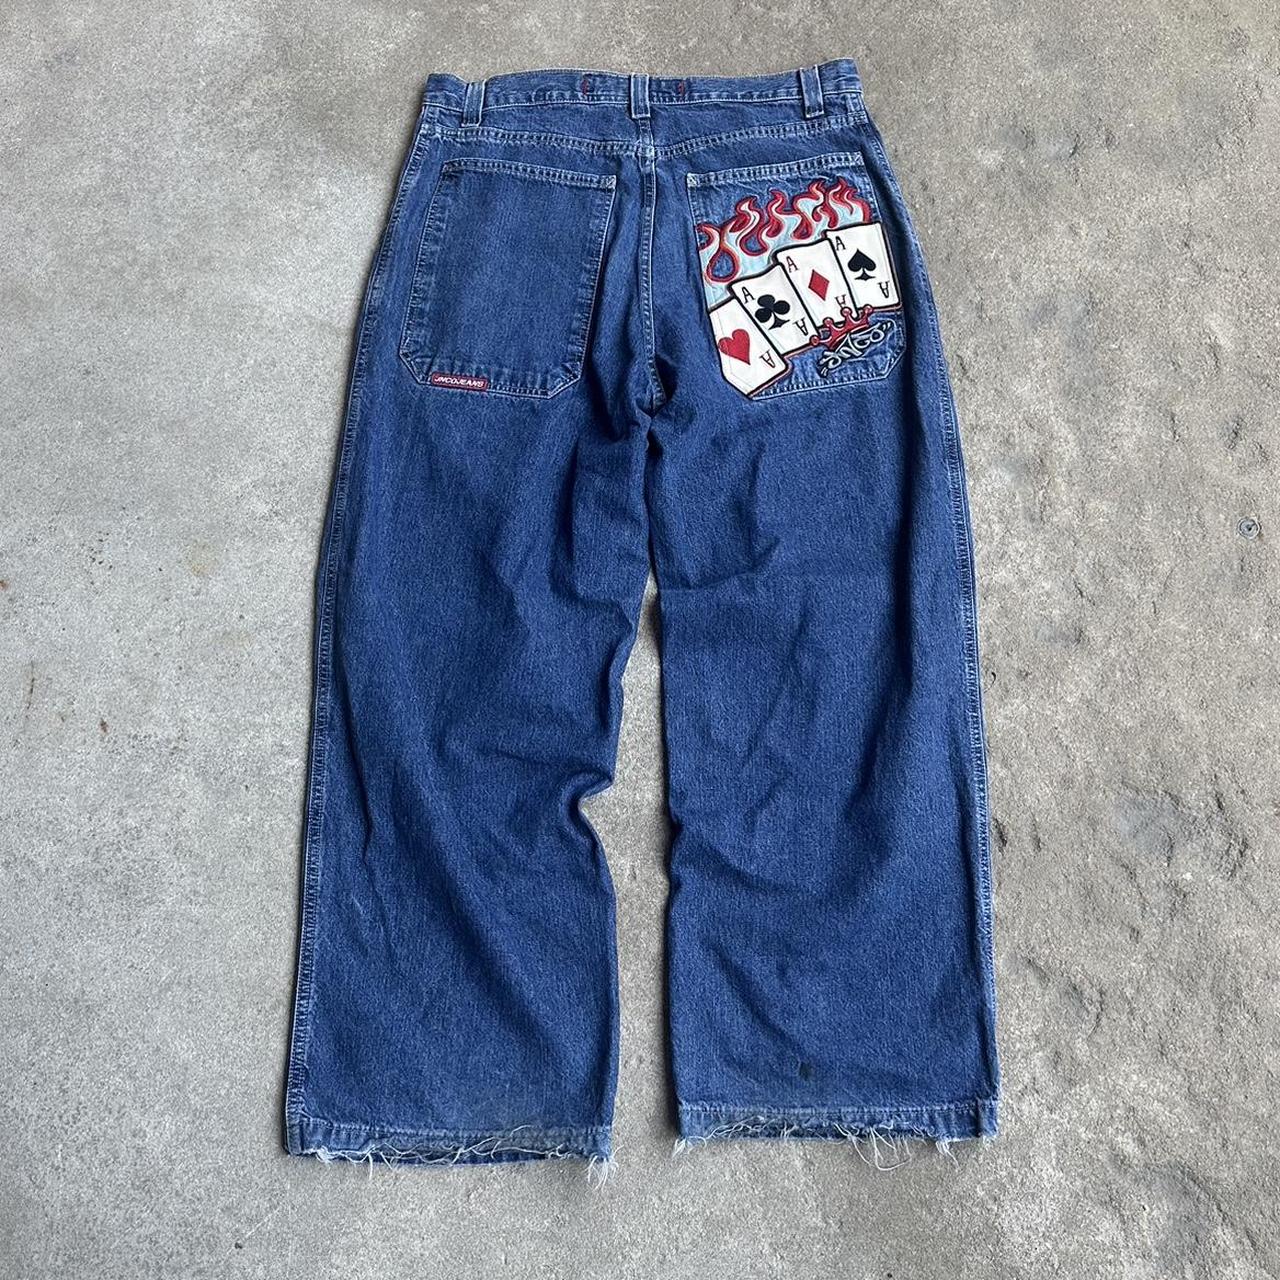 SOLD BUT CHECK MY PAGE FOR MORE RARE JNCOS... - Depop